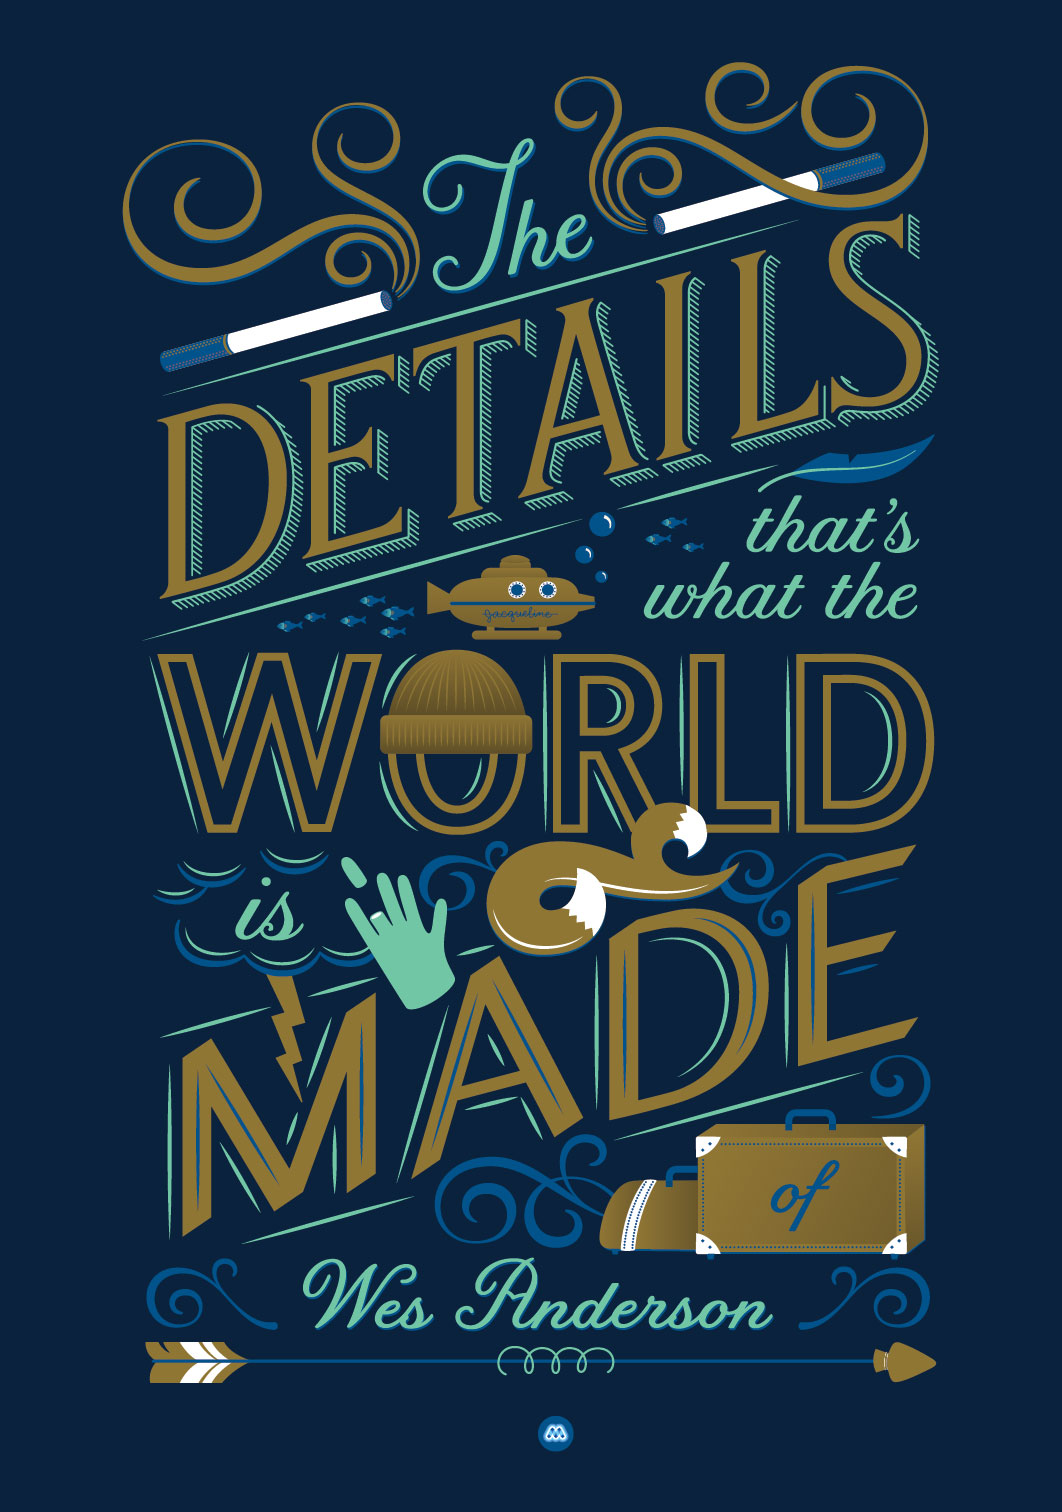 Centerfold poster by Jessica Hische shows a Wes Anderson quote 